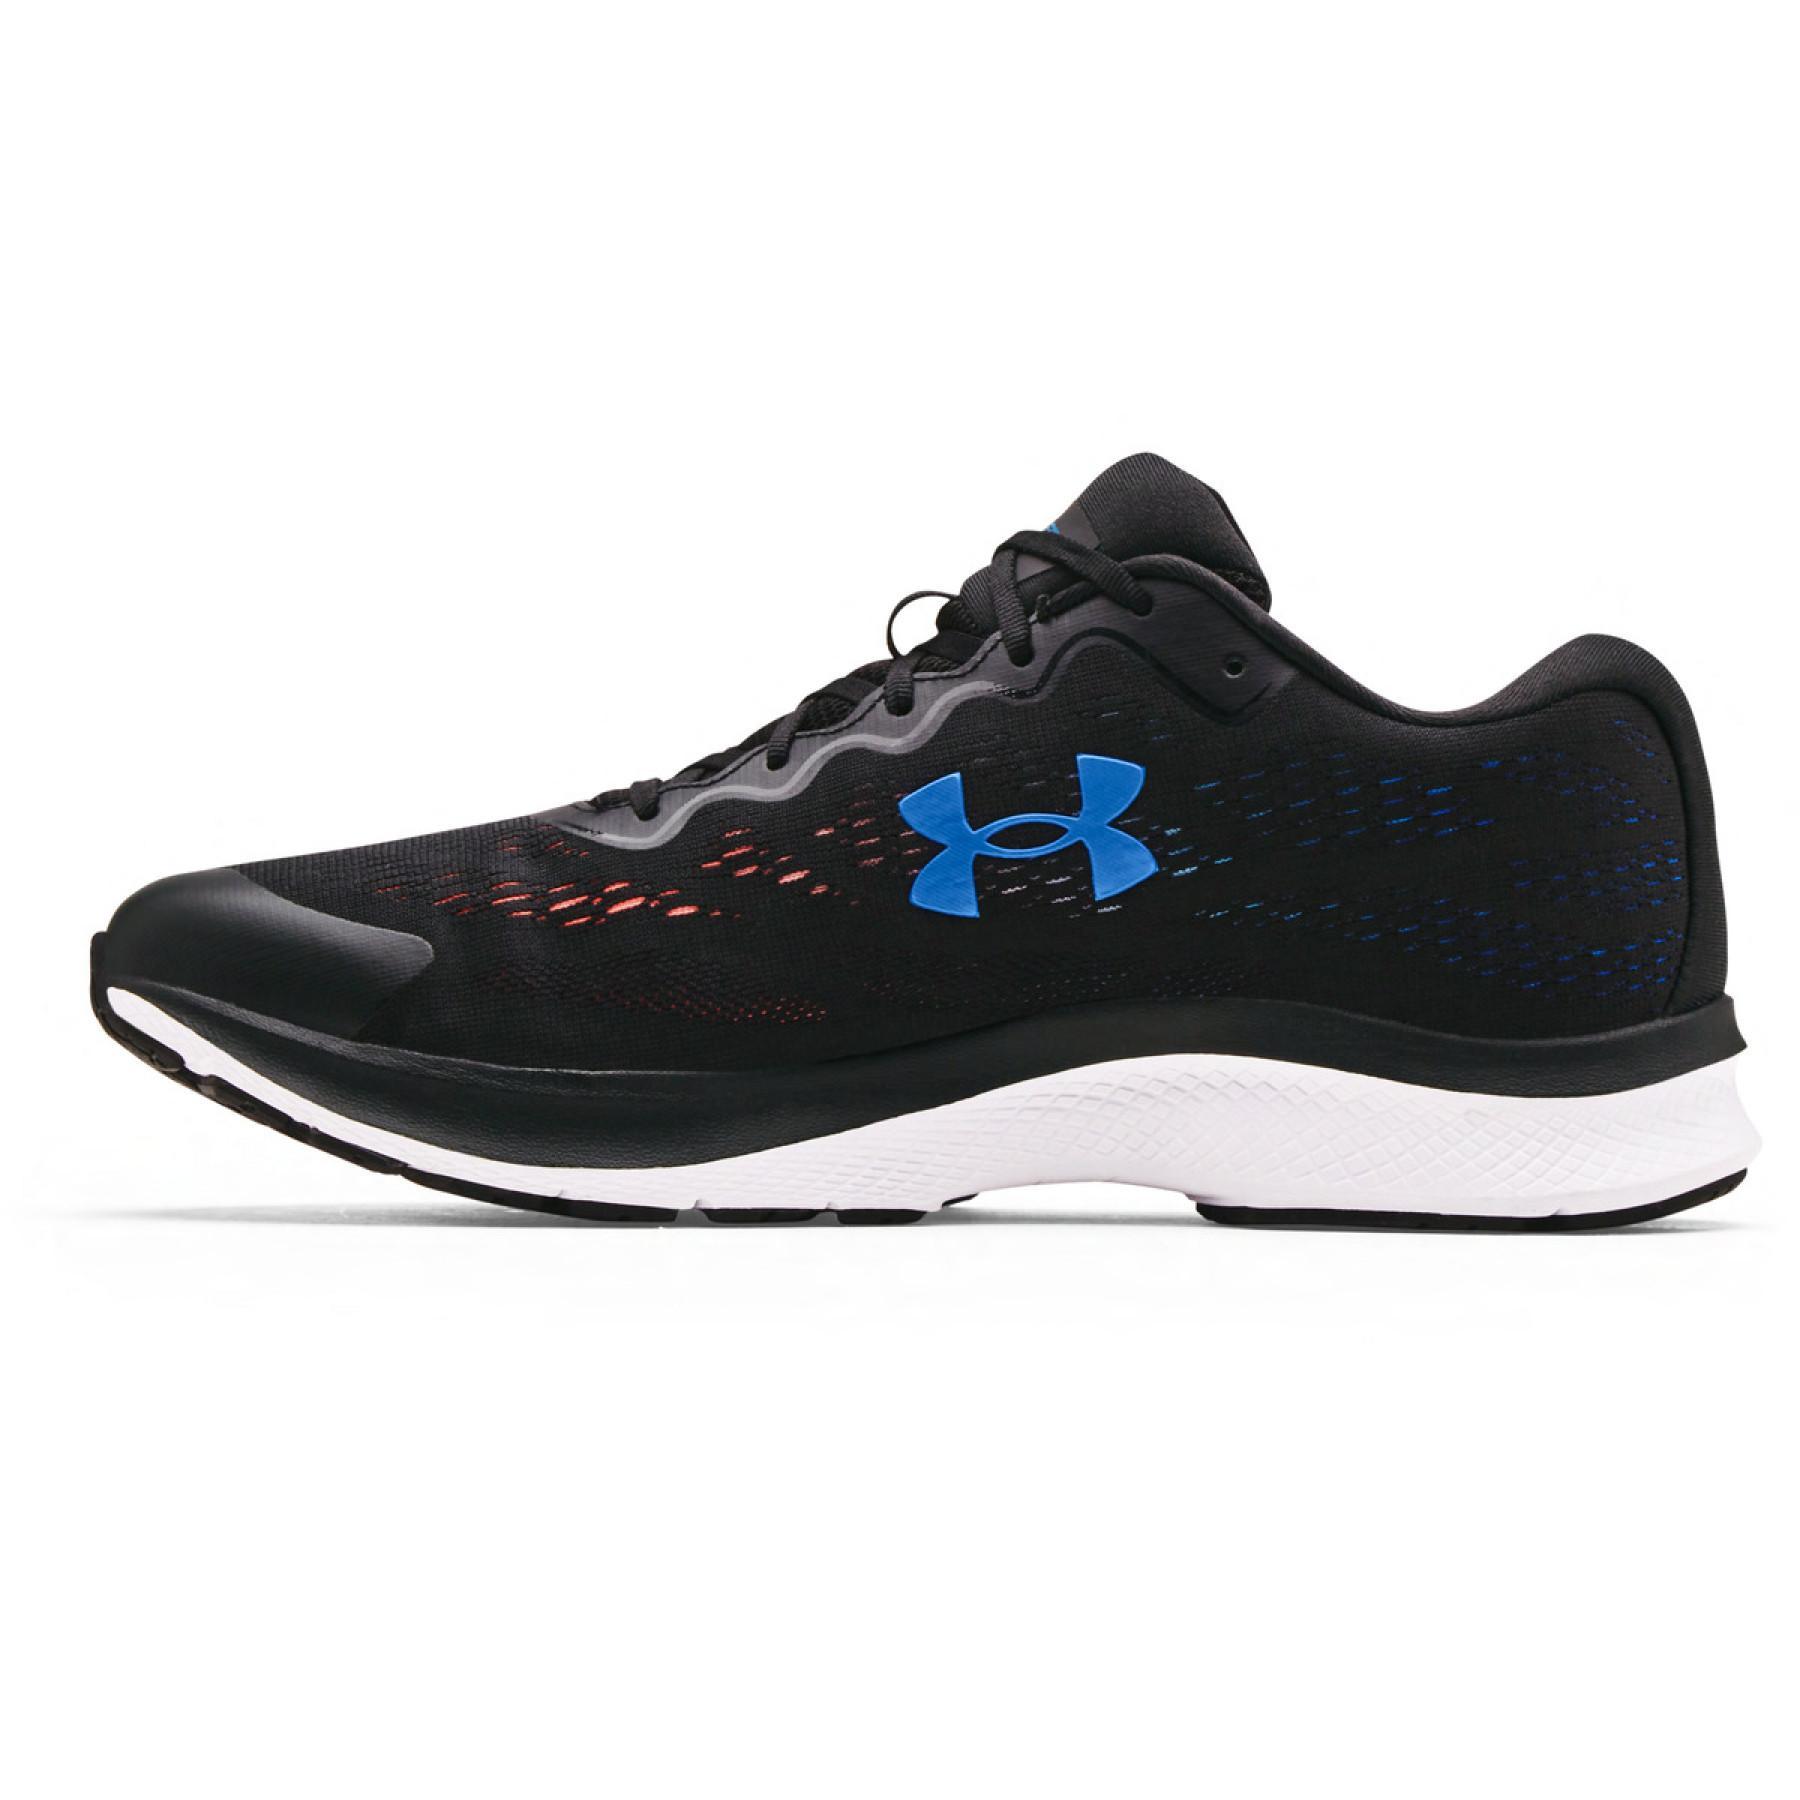 Zapatillas para correr Under Armour Charged Bandit 6